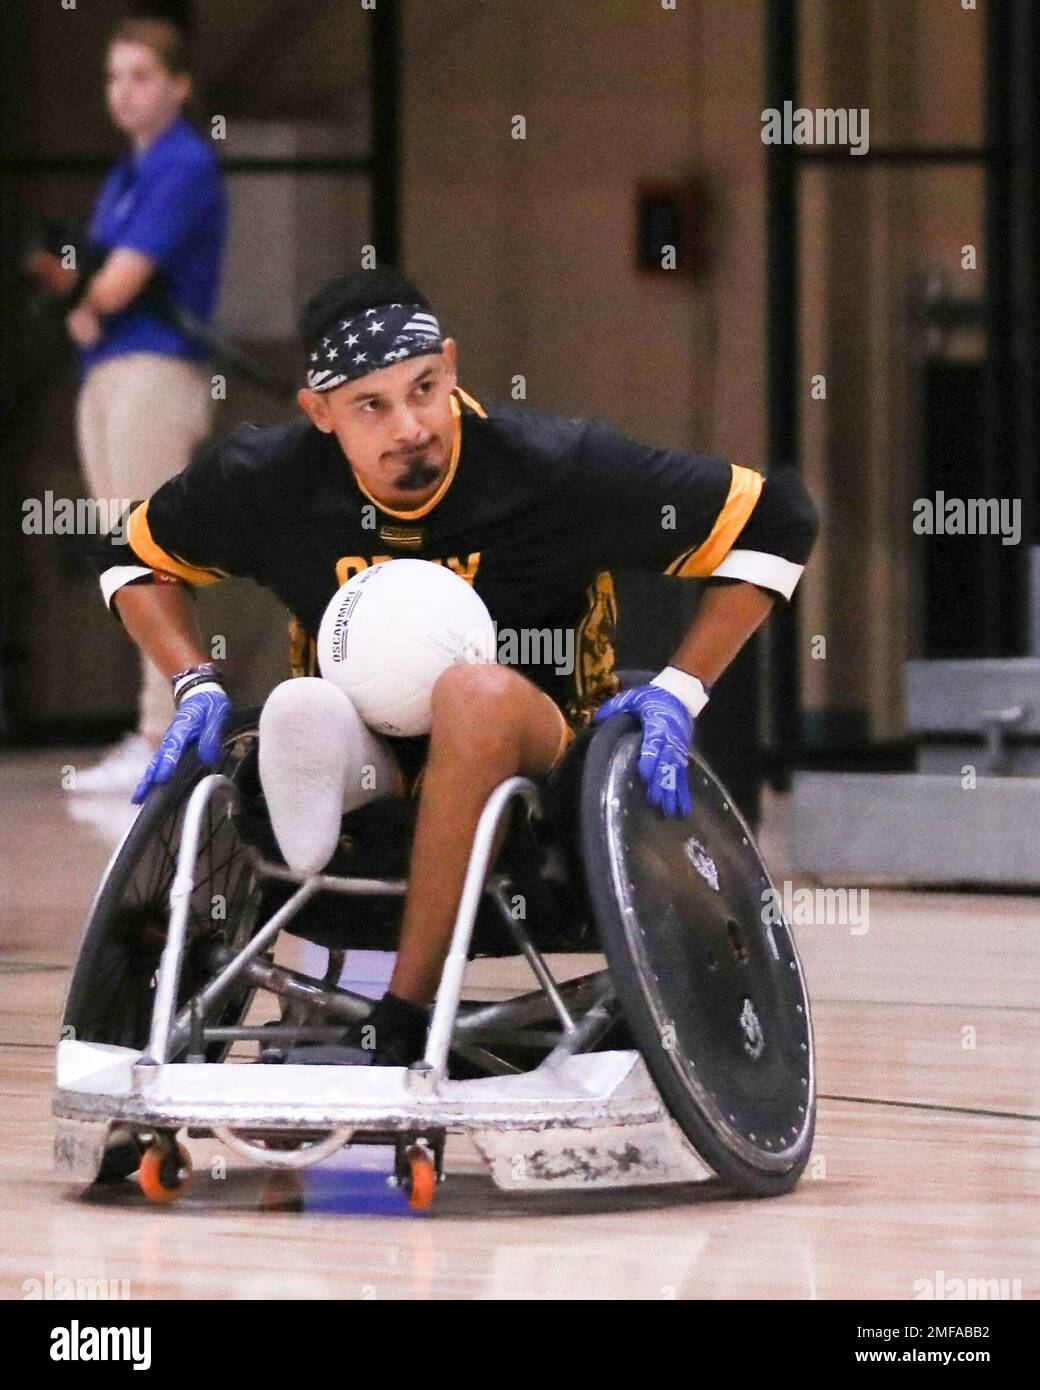 Retired U.S. Army Spc. Michael Villagran races down the court during  wheelchair rugby practice at the 2022 Department of Defense Warrior Games  at the ESPN Wide World of Sports Complex in Orlando,